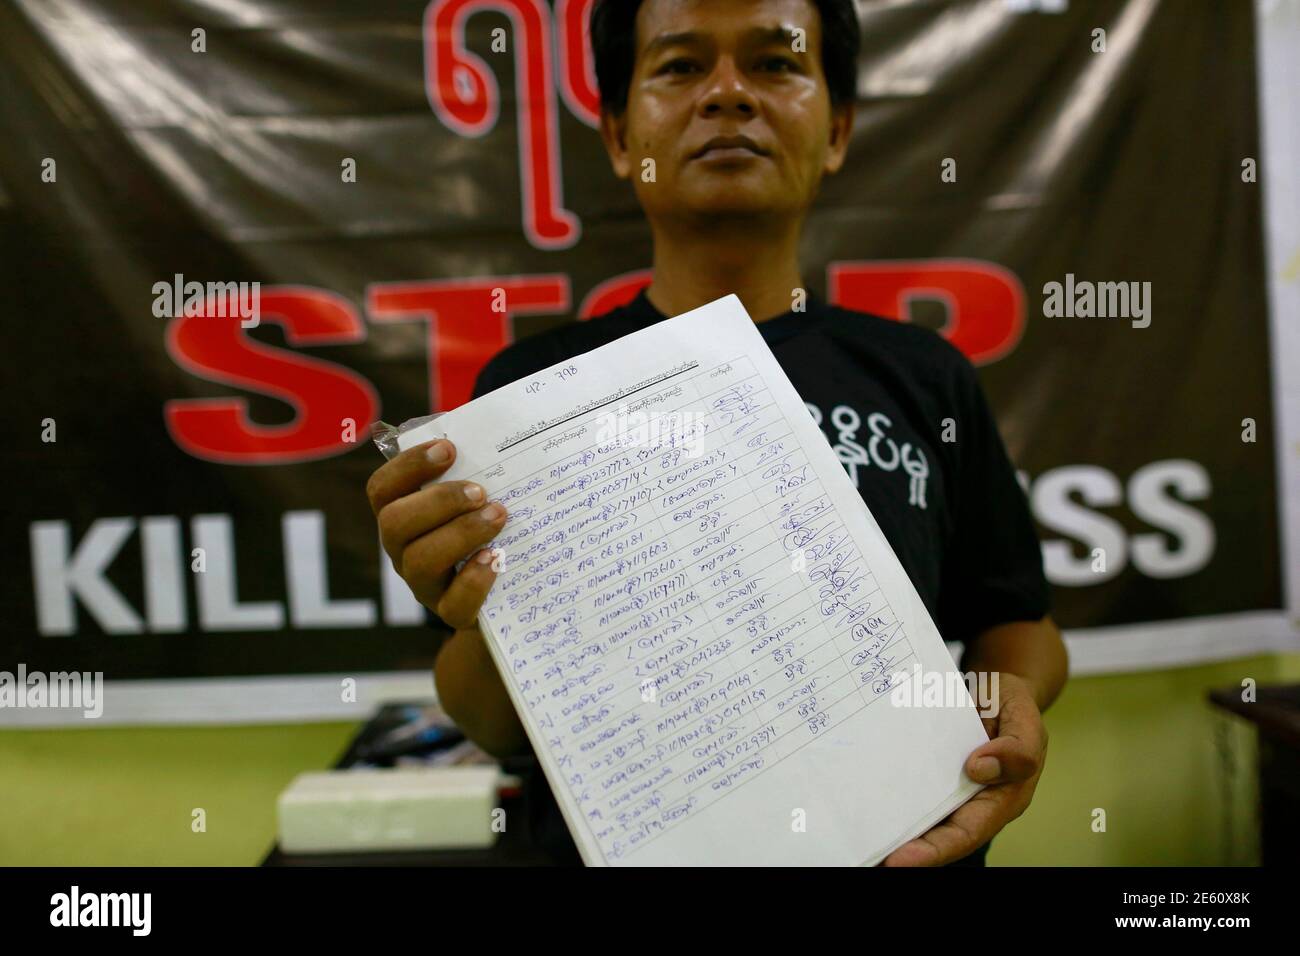 A reporter shows signatures they collected in support of the freedom press law in the Myanmar Journalist Network office in Yangon September 3, 2013. The junta is gone, but the Electronic Transactions Law and other draconian legislation remain on Myanmar's books. Attempts to revamp them are stirring debate over the reformist credentials of the semi-civilian government that took power in 2011 and how far it will loosen tough state controls. Picture taken September 3, 2013.   To match Feature MYANMAR-LAWS/    REUTERS/Soe Zeya Tun (MYANMAR - Tags: POLITICS CRIME LAW MEDIA) Stock Photo